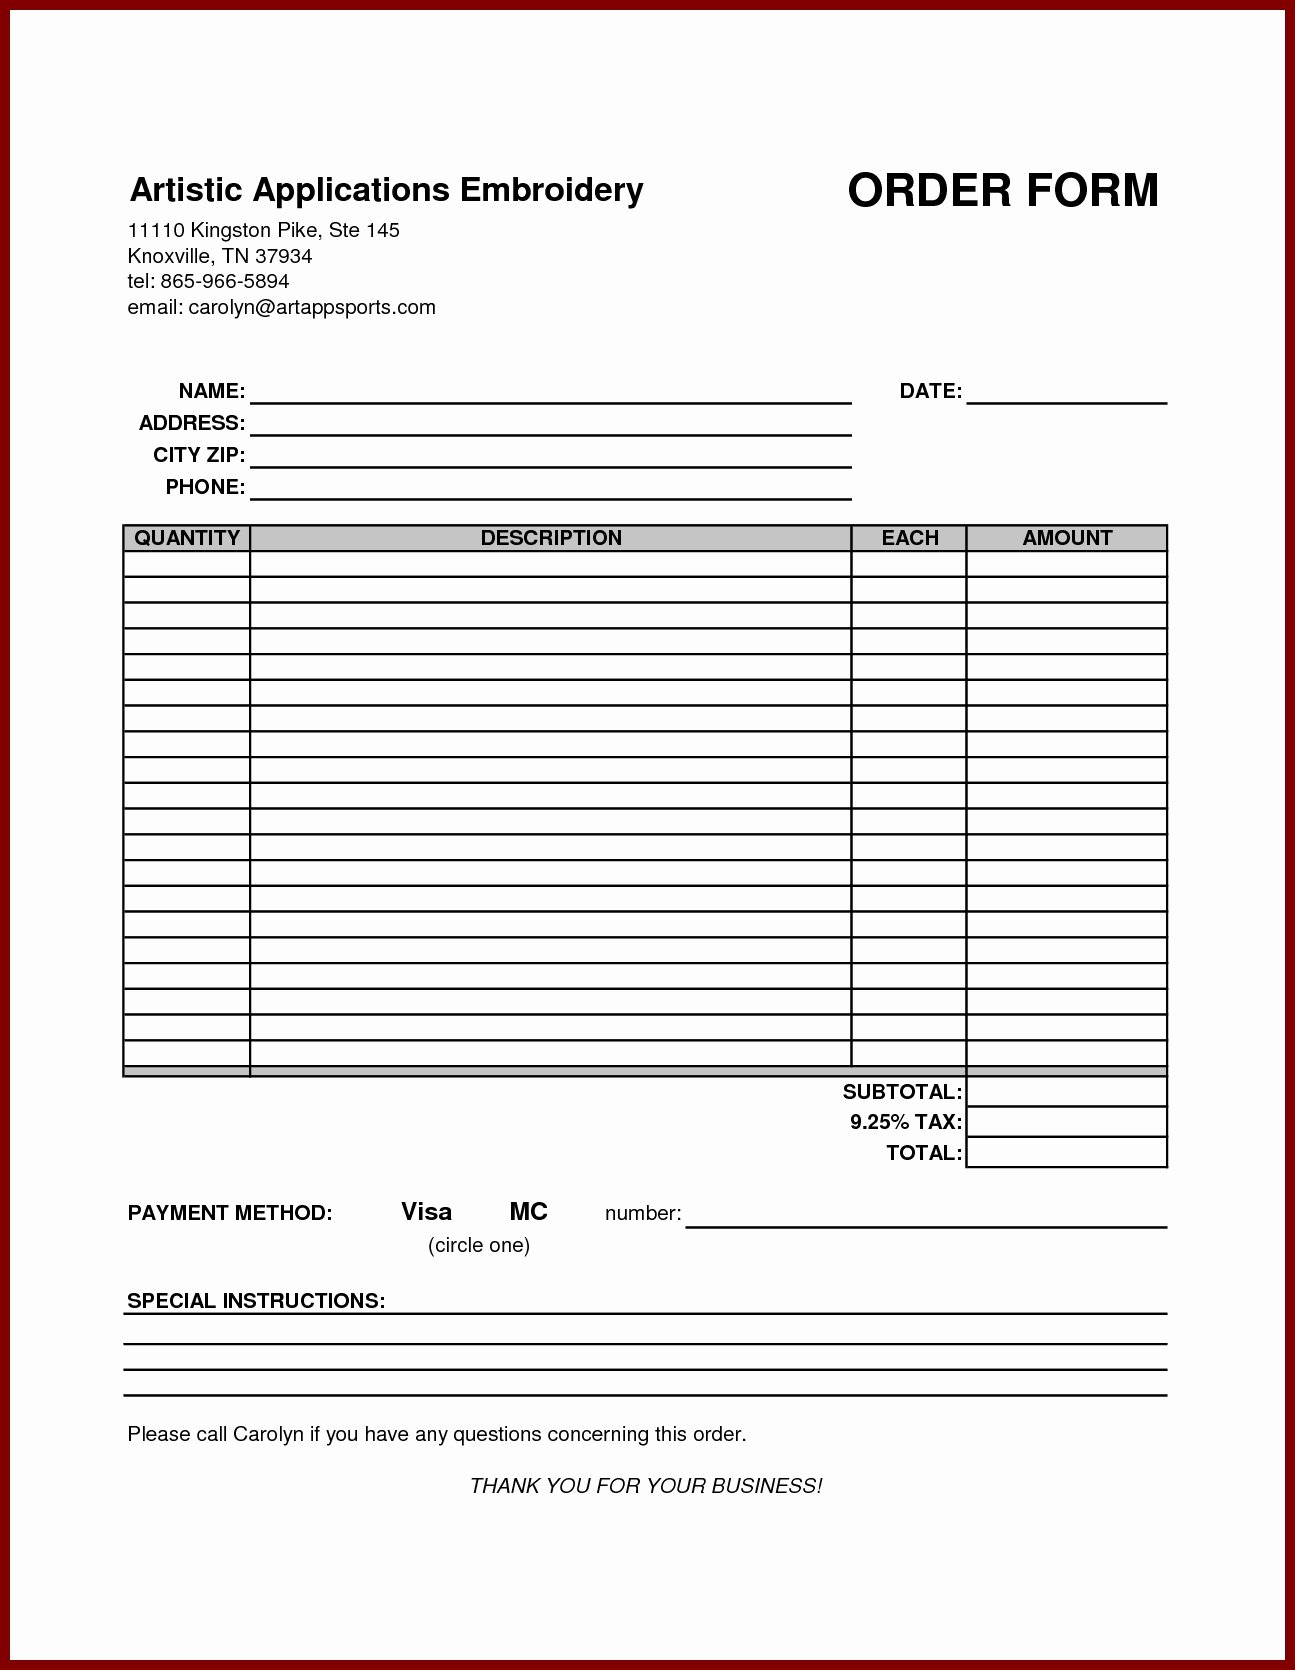 Product order form Template Awesome order form Template